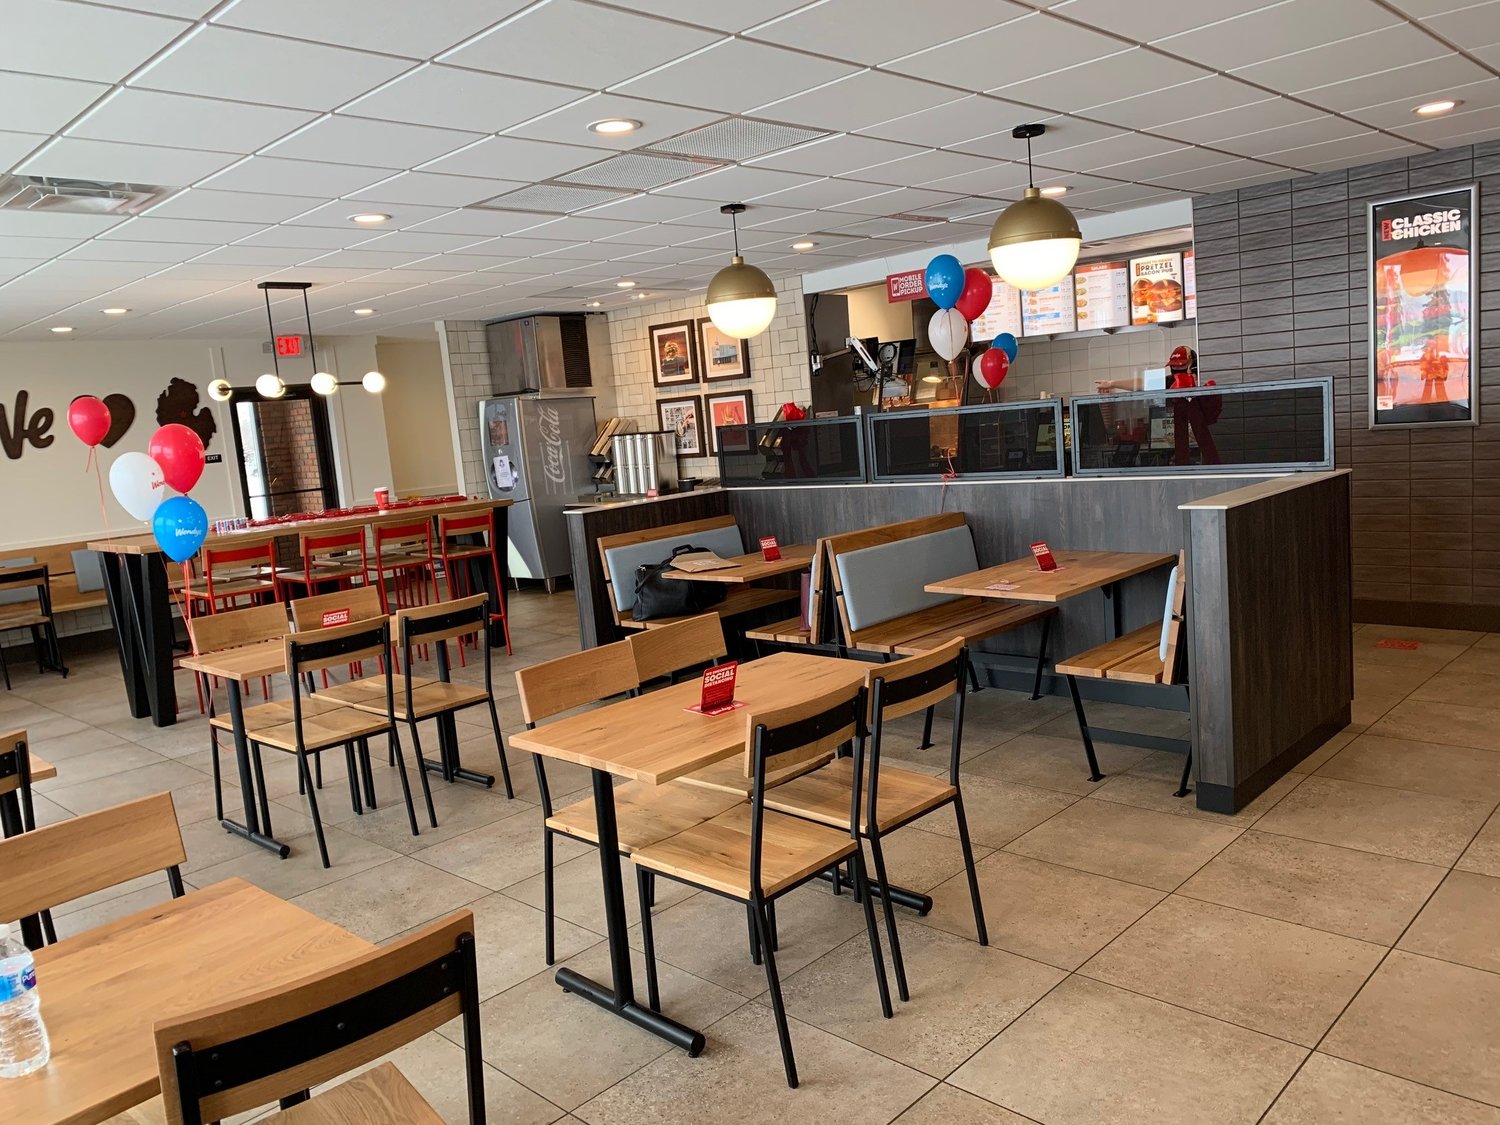 The newly remodeled dining room of Wendy's in Clare, Michigan.